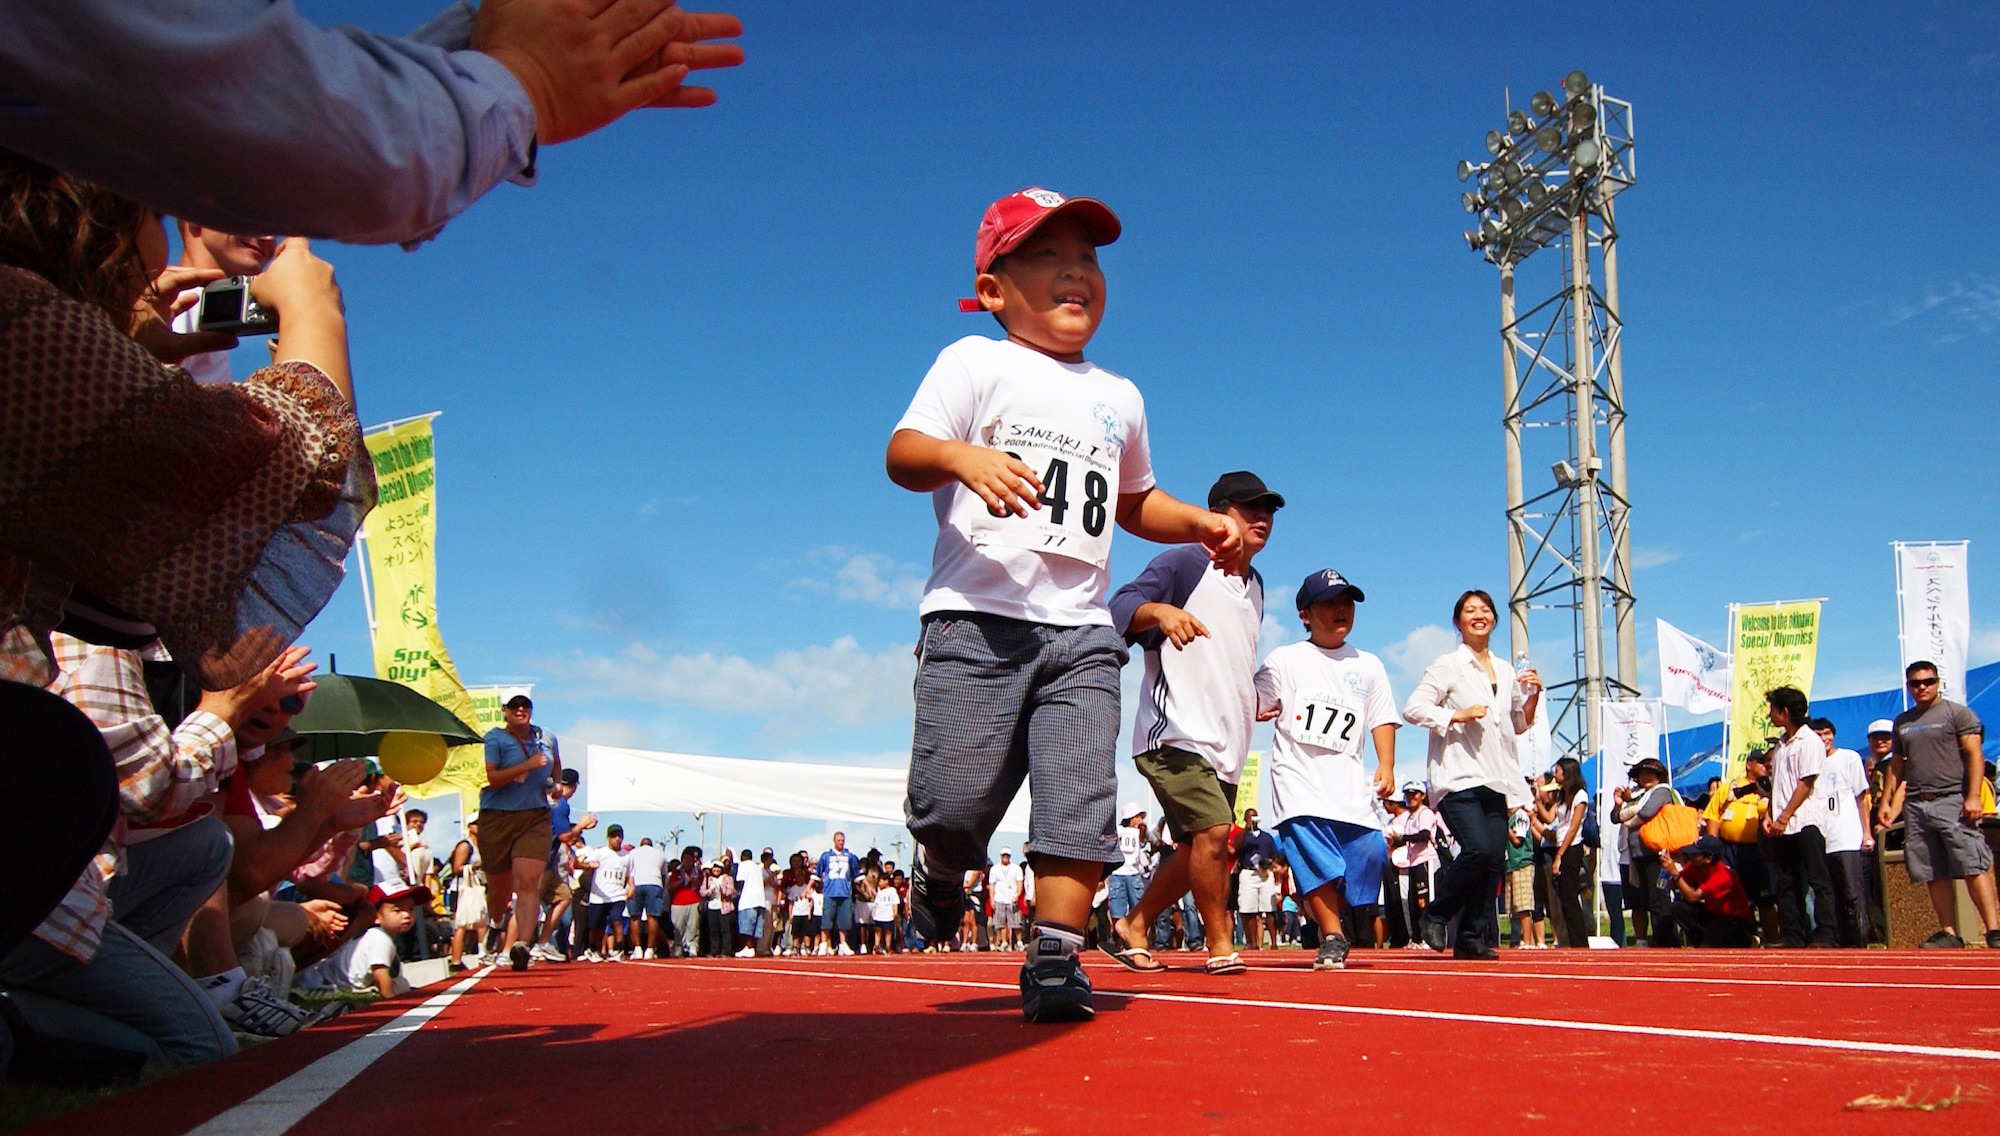 A young Okinawan boy participates in a run during the beginning of Kadena Special Olympics Nov. 8, 2008 at Kadena Air Base, Japan. Kadena hosted the 9th Annual Special Olympic Games and Art Festival for special needs Okinawan and American adult and child athletes.    (U.S. Air Force photo/Tech. Sgt. Rey Ramon)                           